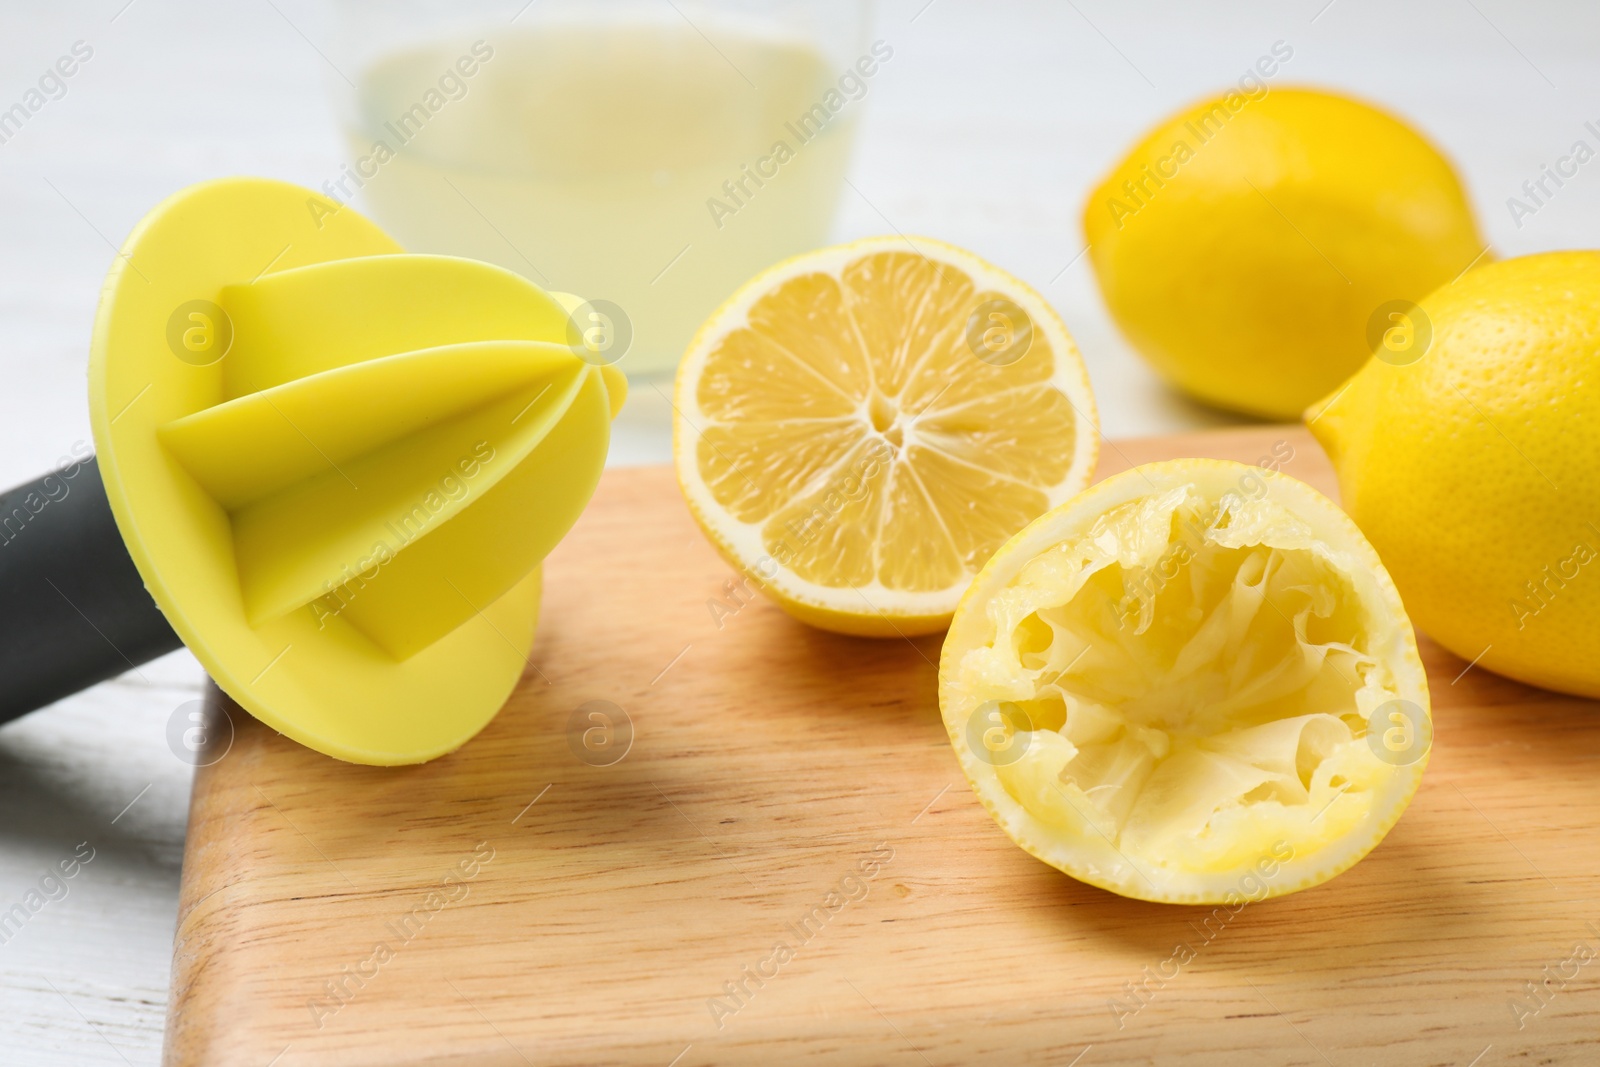 Photo of Citrus juicer and squeezed lemon on wooden board